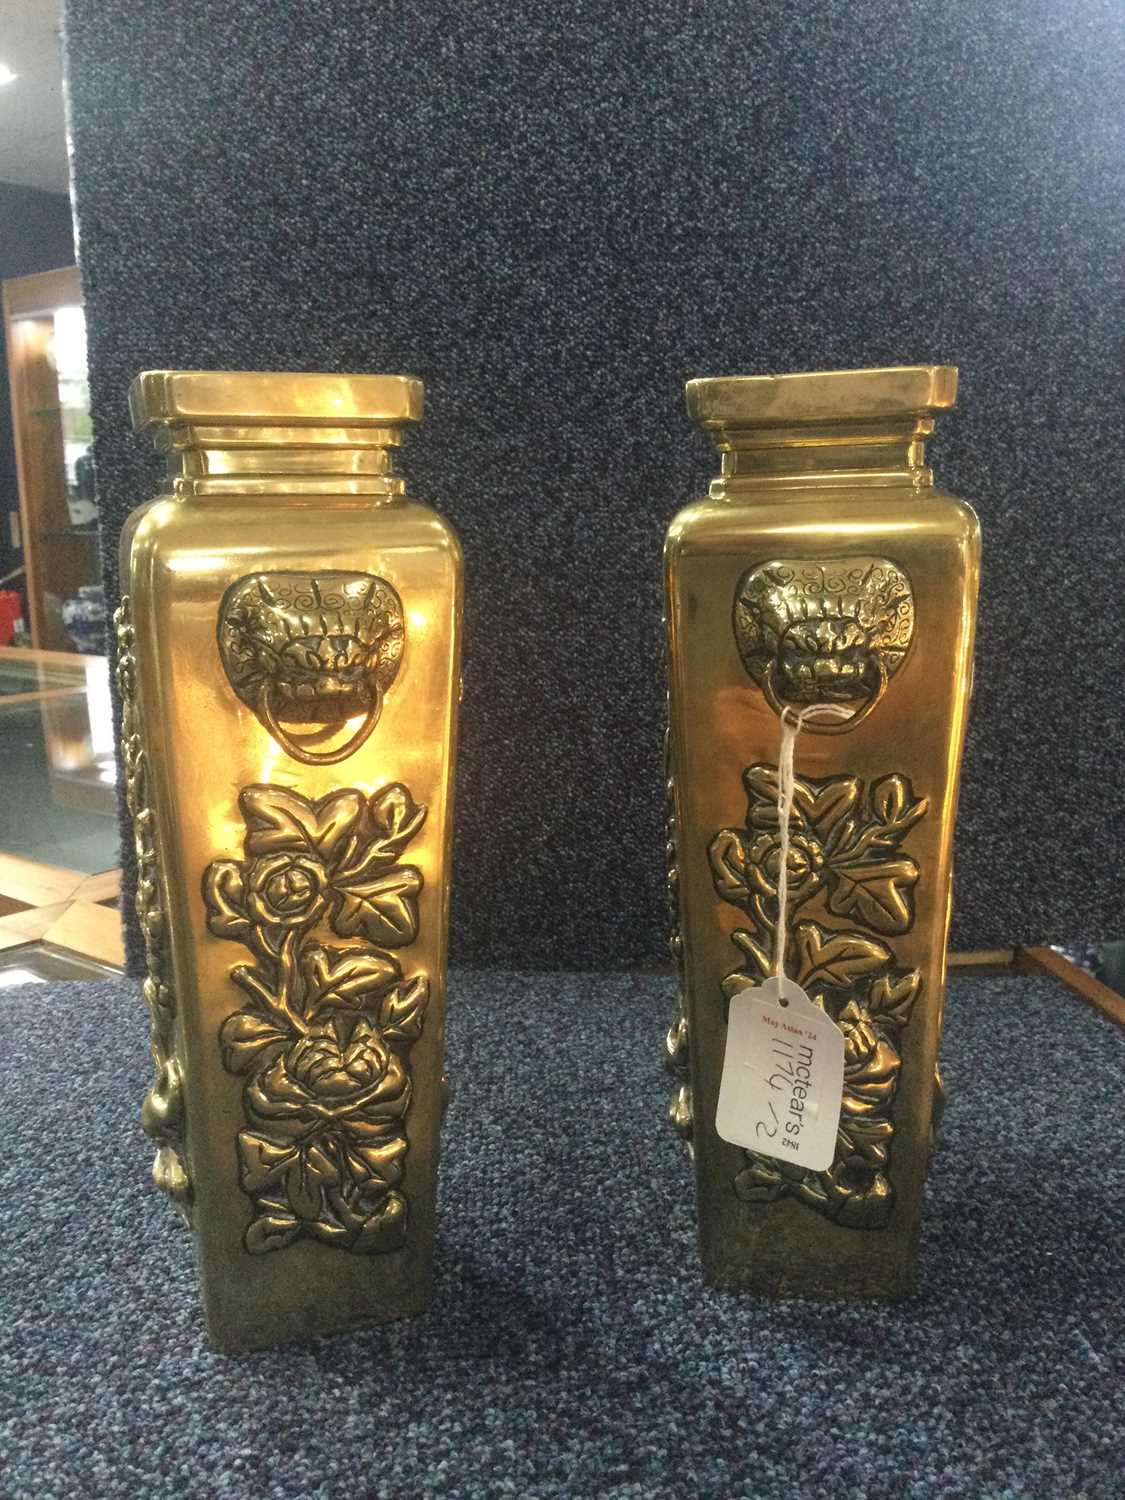 PAIR OF CHINESE BRASS VASES, EARLY 20TH CENTURY - Image 6 of 8